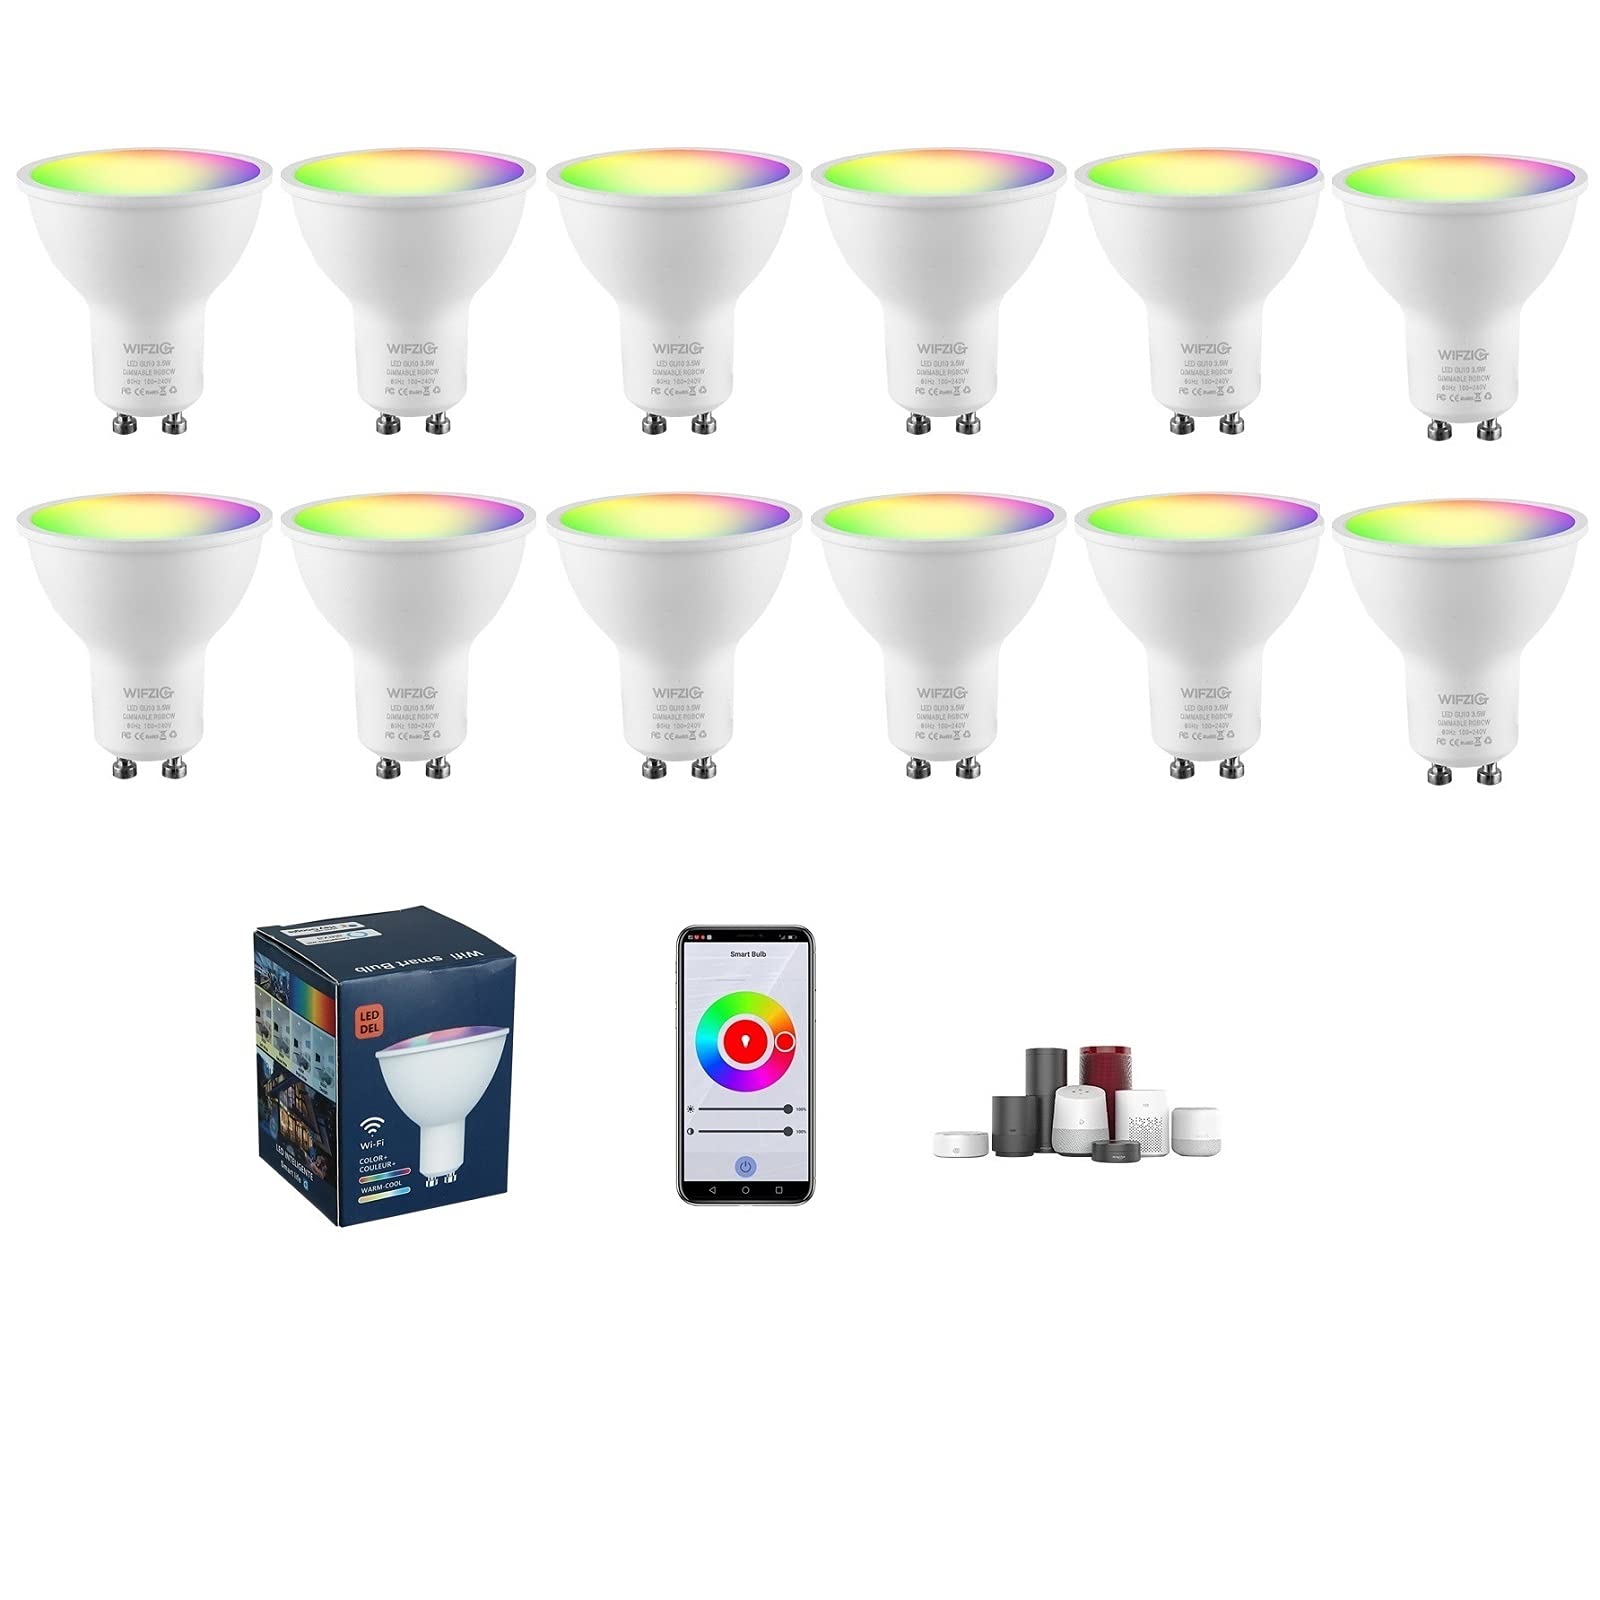 WIFZIG GU10 Smart LED Light Bulbs, RGB+CW Color Change,Compatible with Alexa & Google Assistant, 2700-6500K,Multicolor Track Light Bulb, Dimmable w...